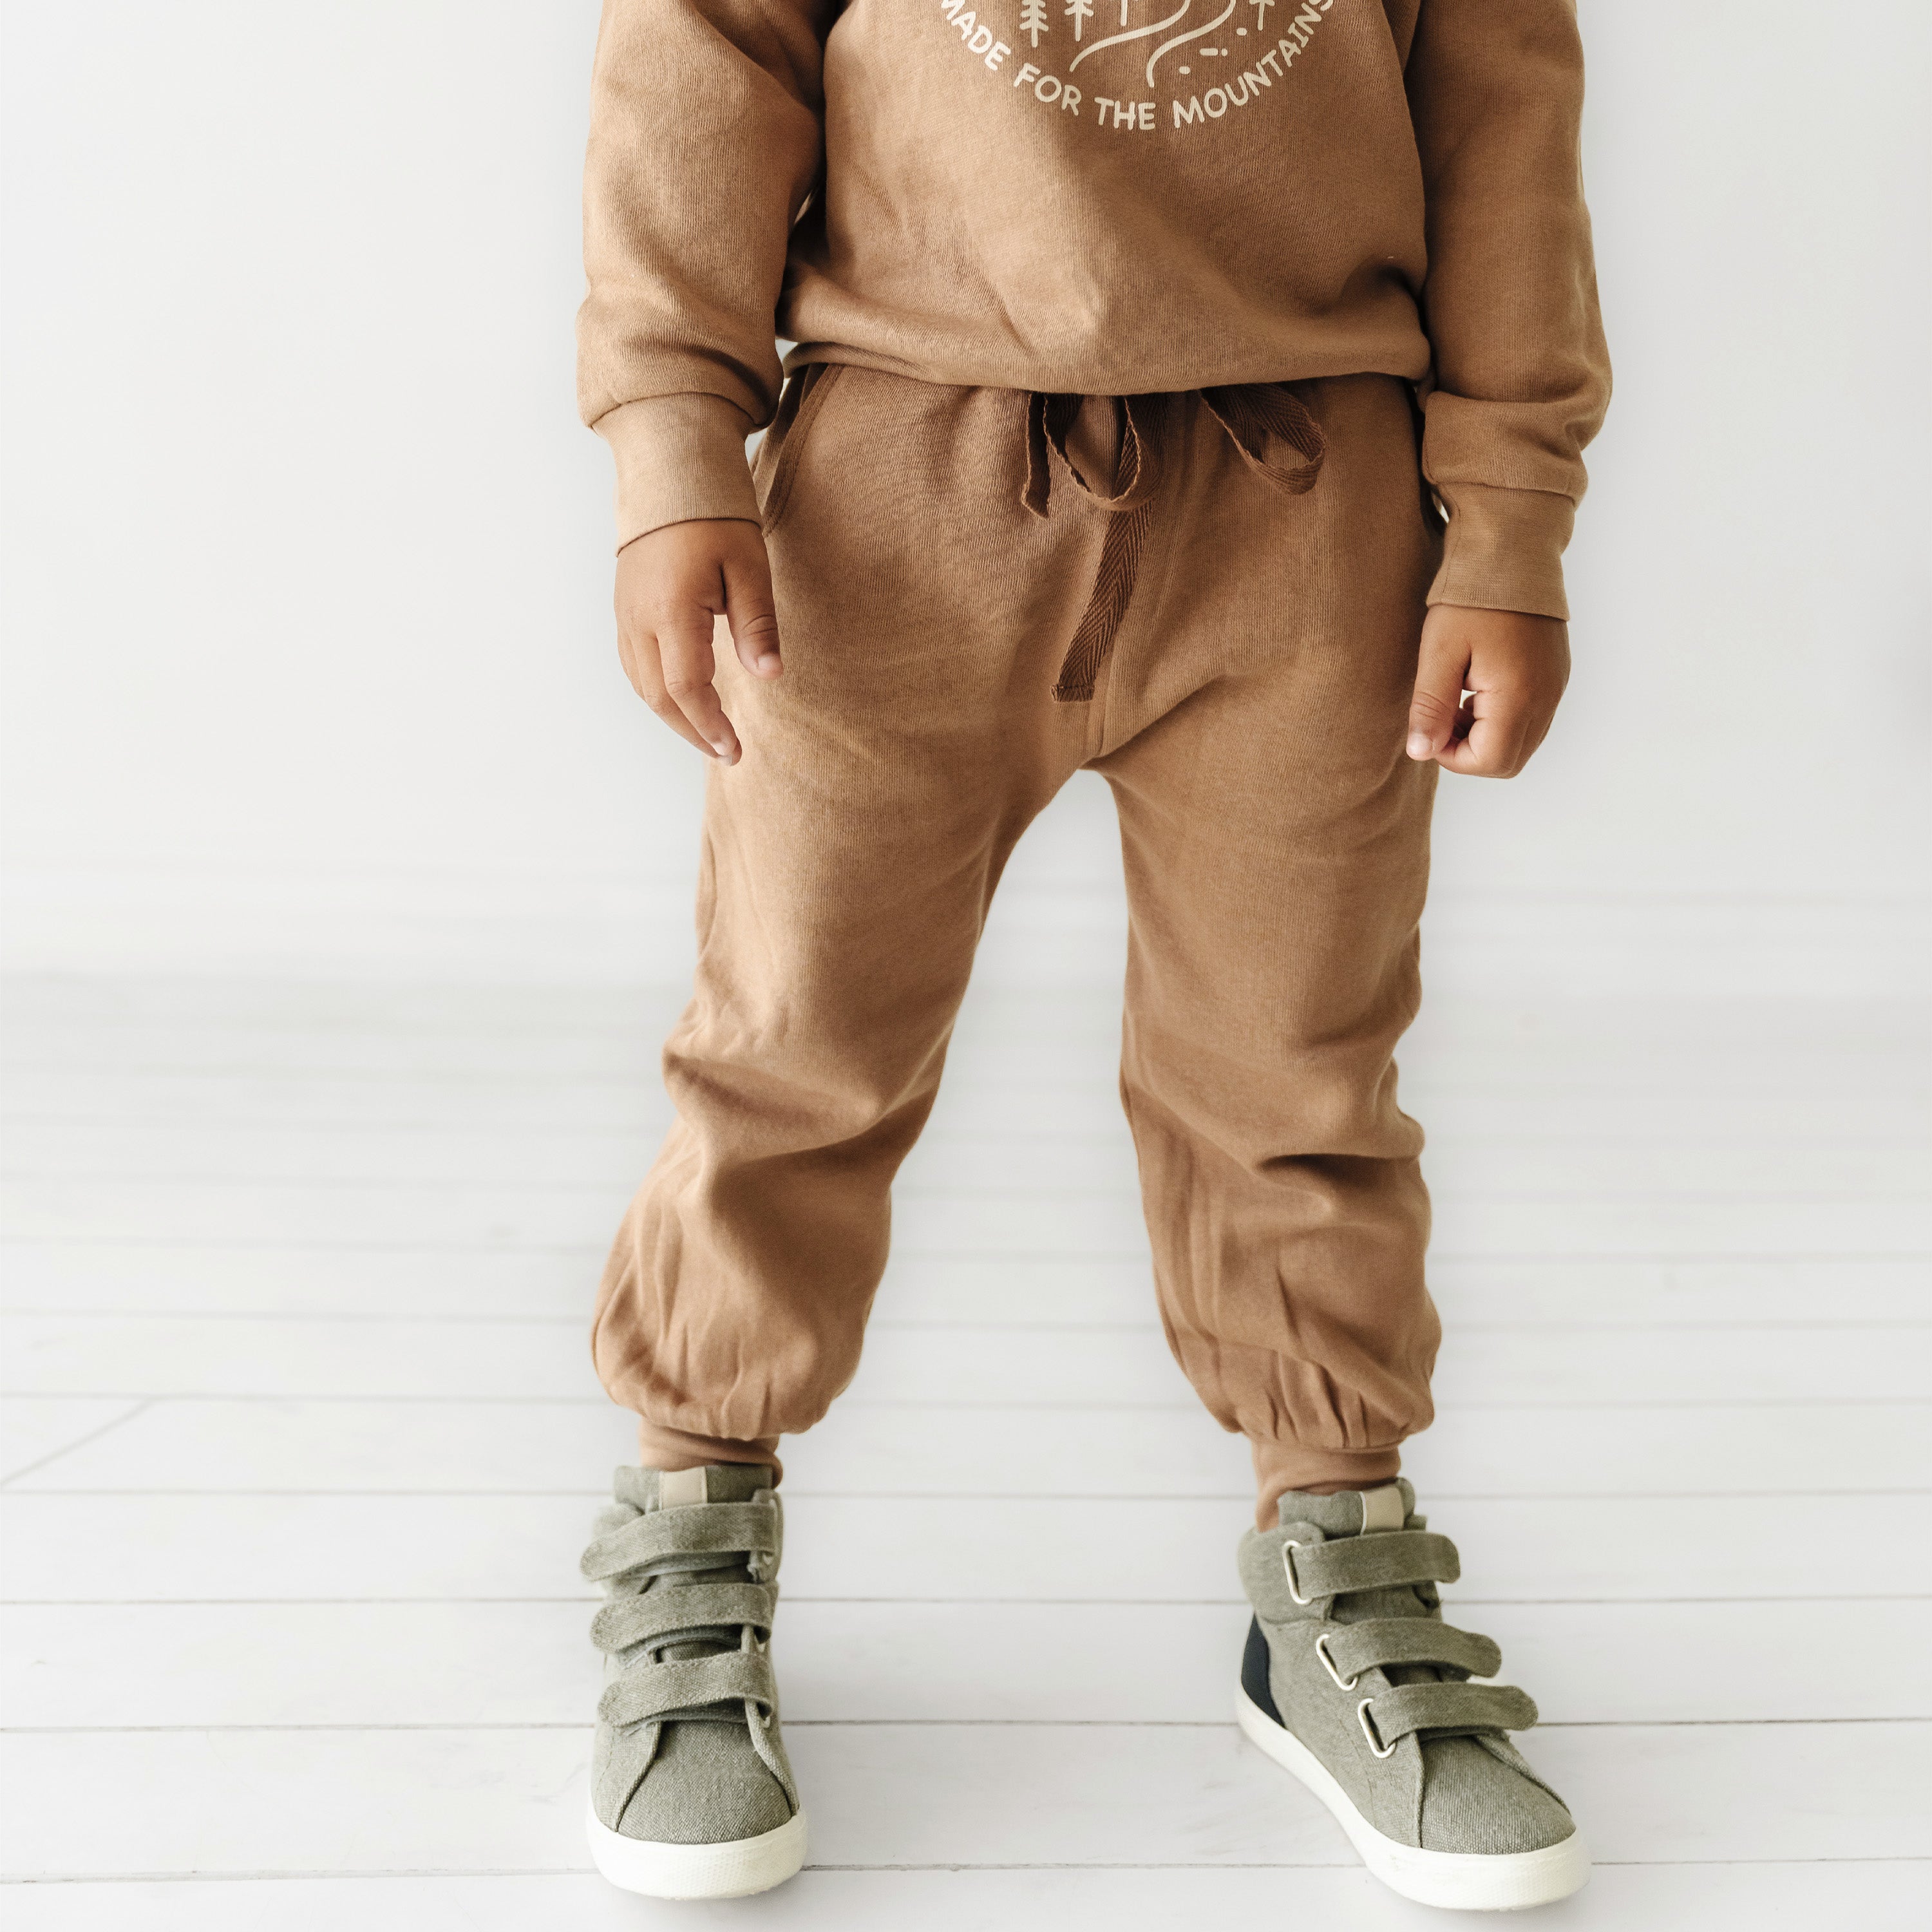 A toddler dressed in Organic Baby's Makemake Organics brown hoodie and matching sweatpants stands against a white background, showcasing green sneakers. Only the child's body from the neck down is visible.